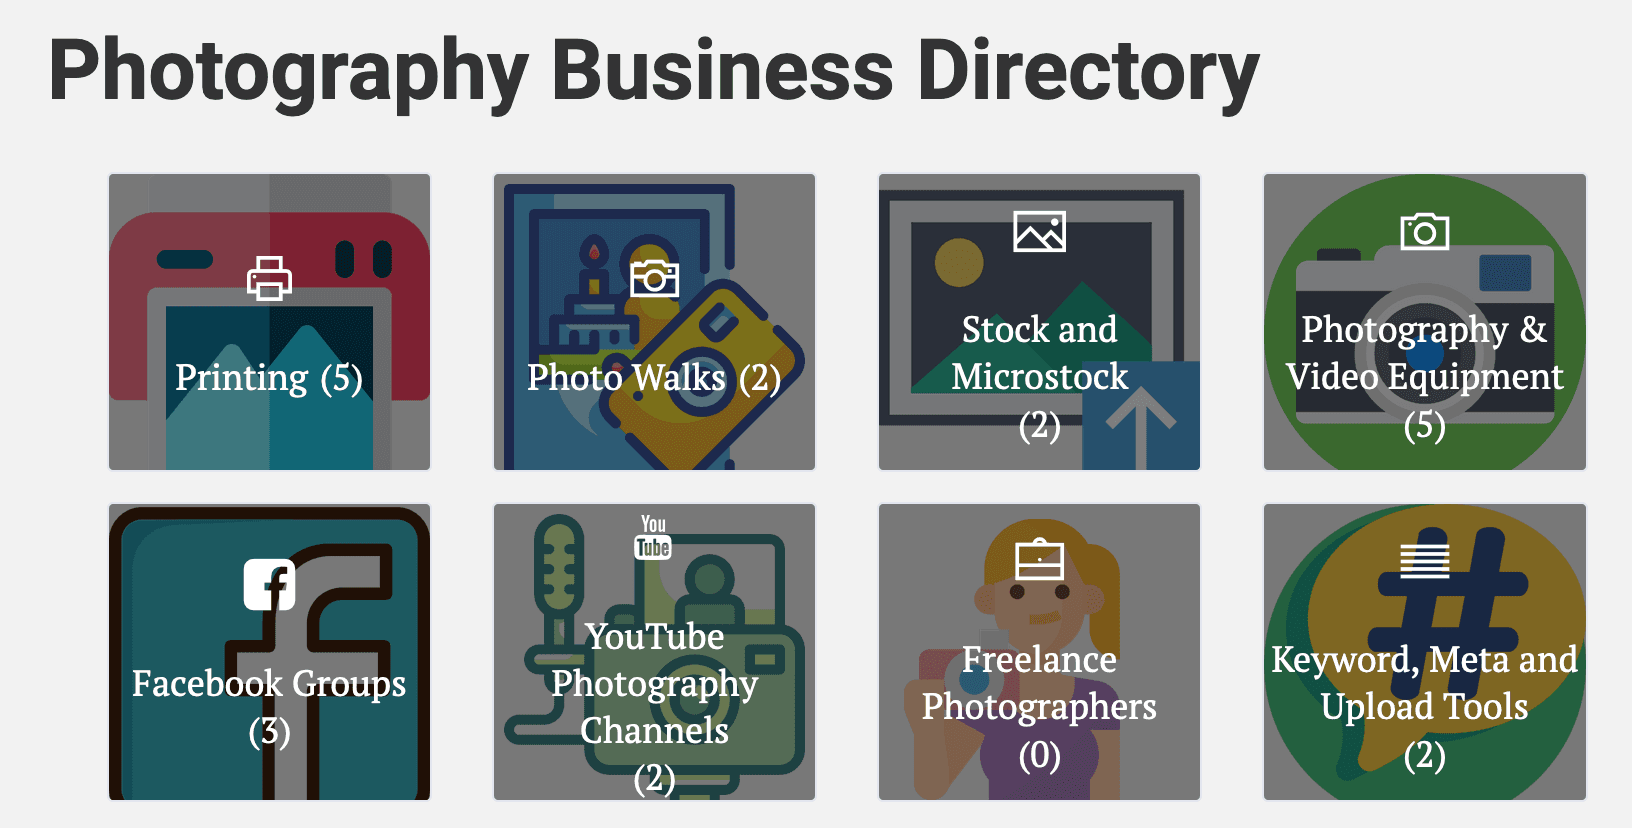 Photography Business Directory - Launched 6